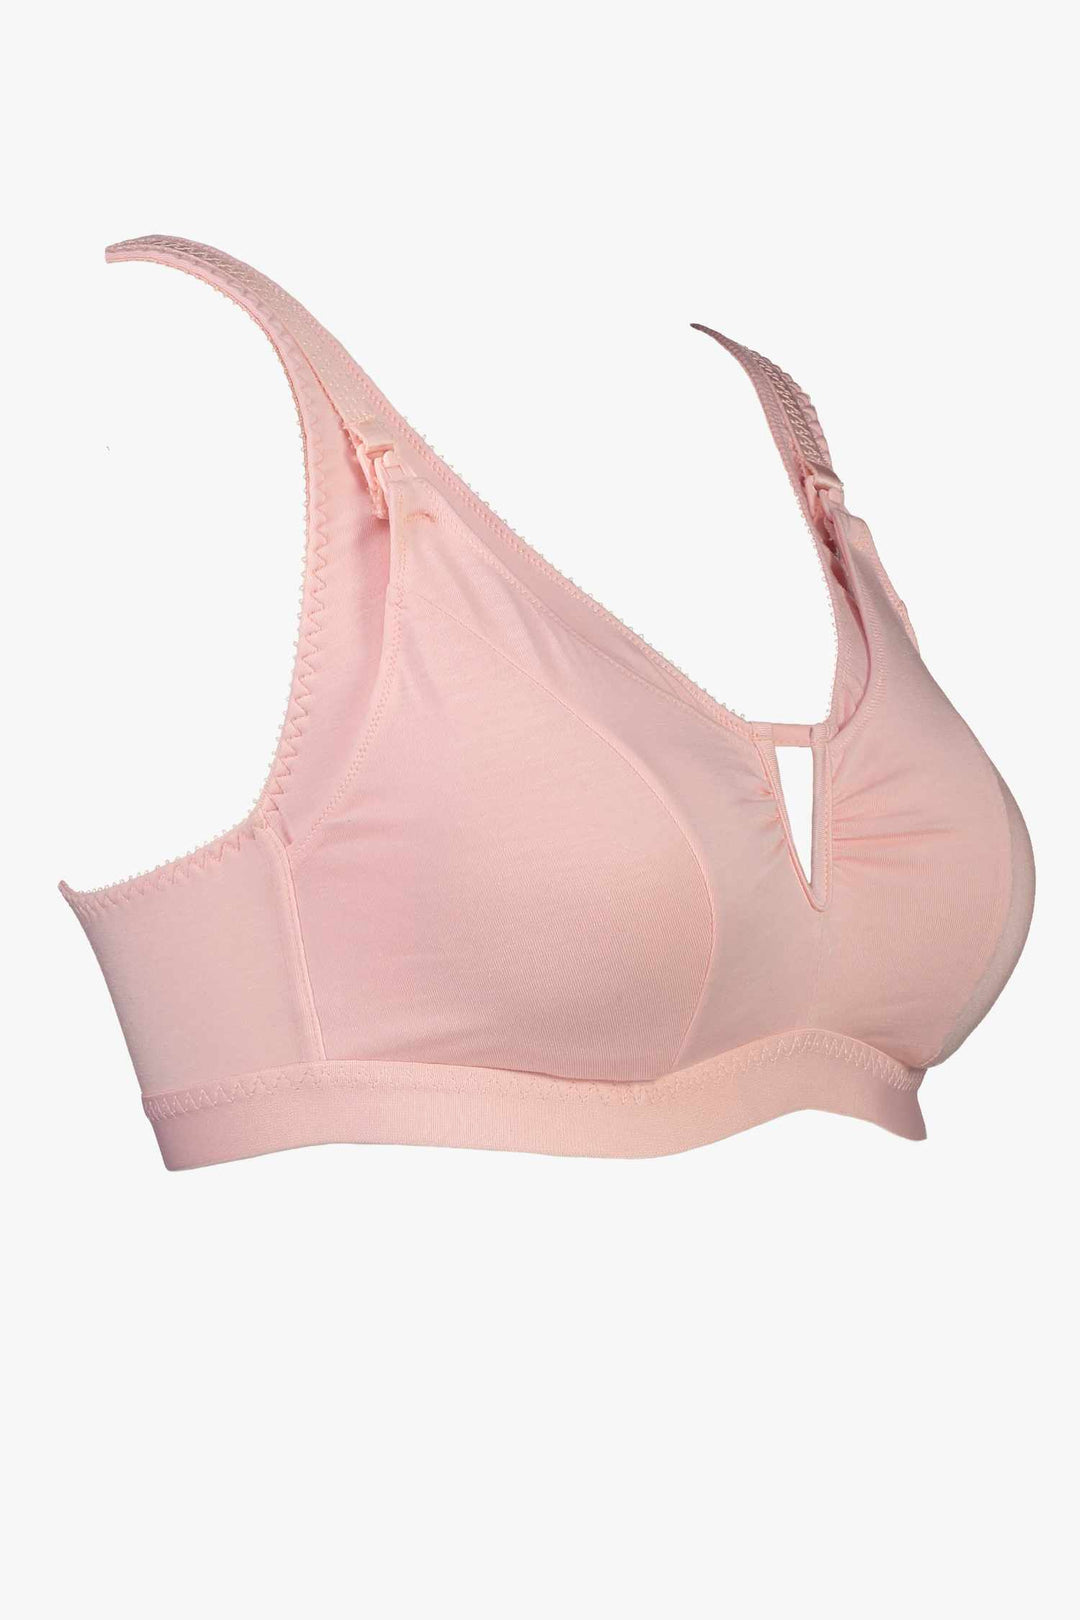 Videris Lingerie  Belle Soft Cup Maternity Bra in Rosy Pink